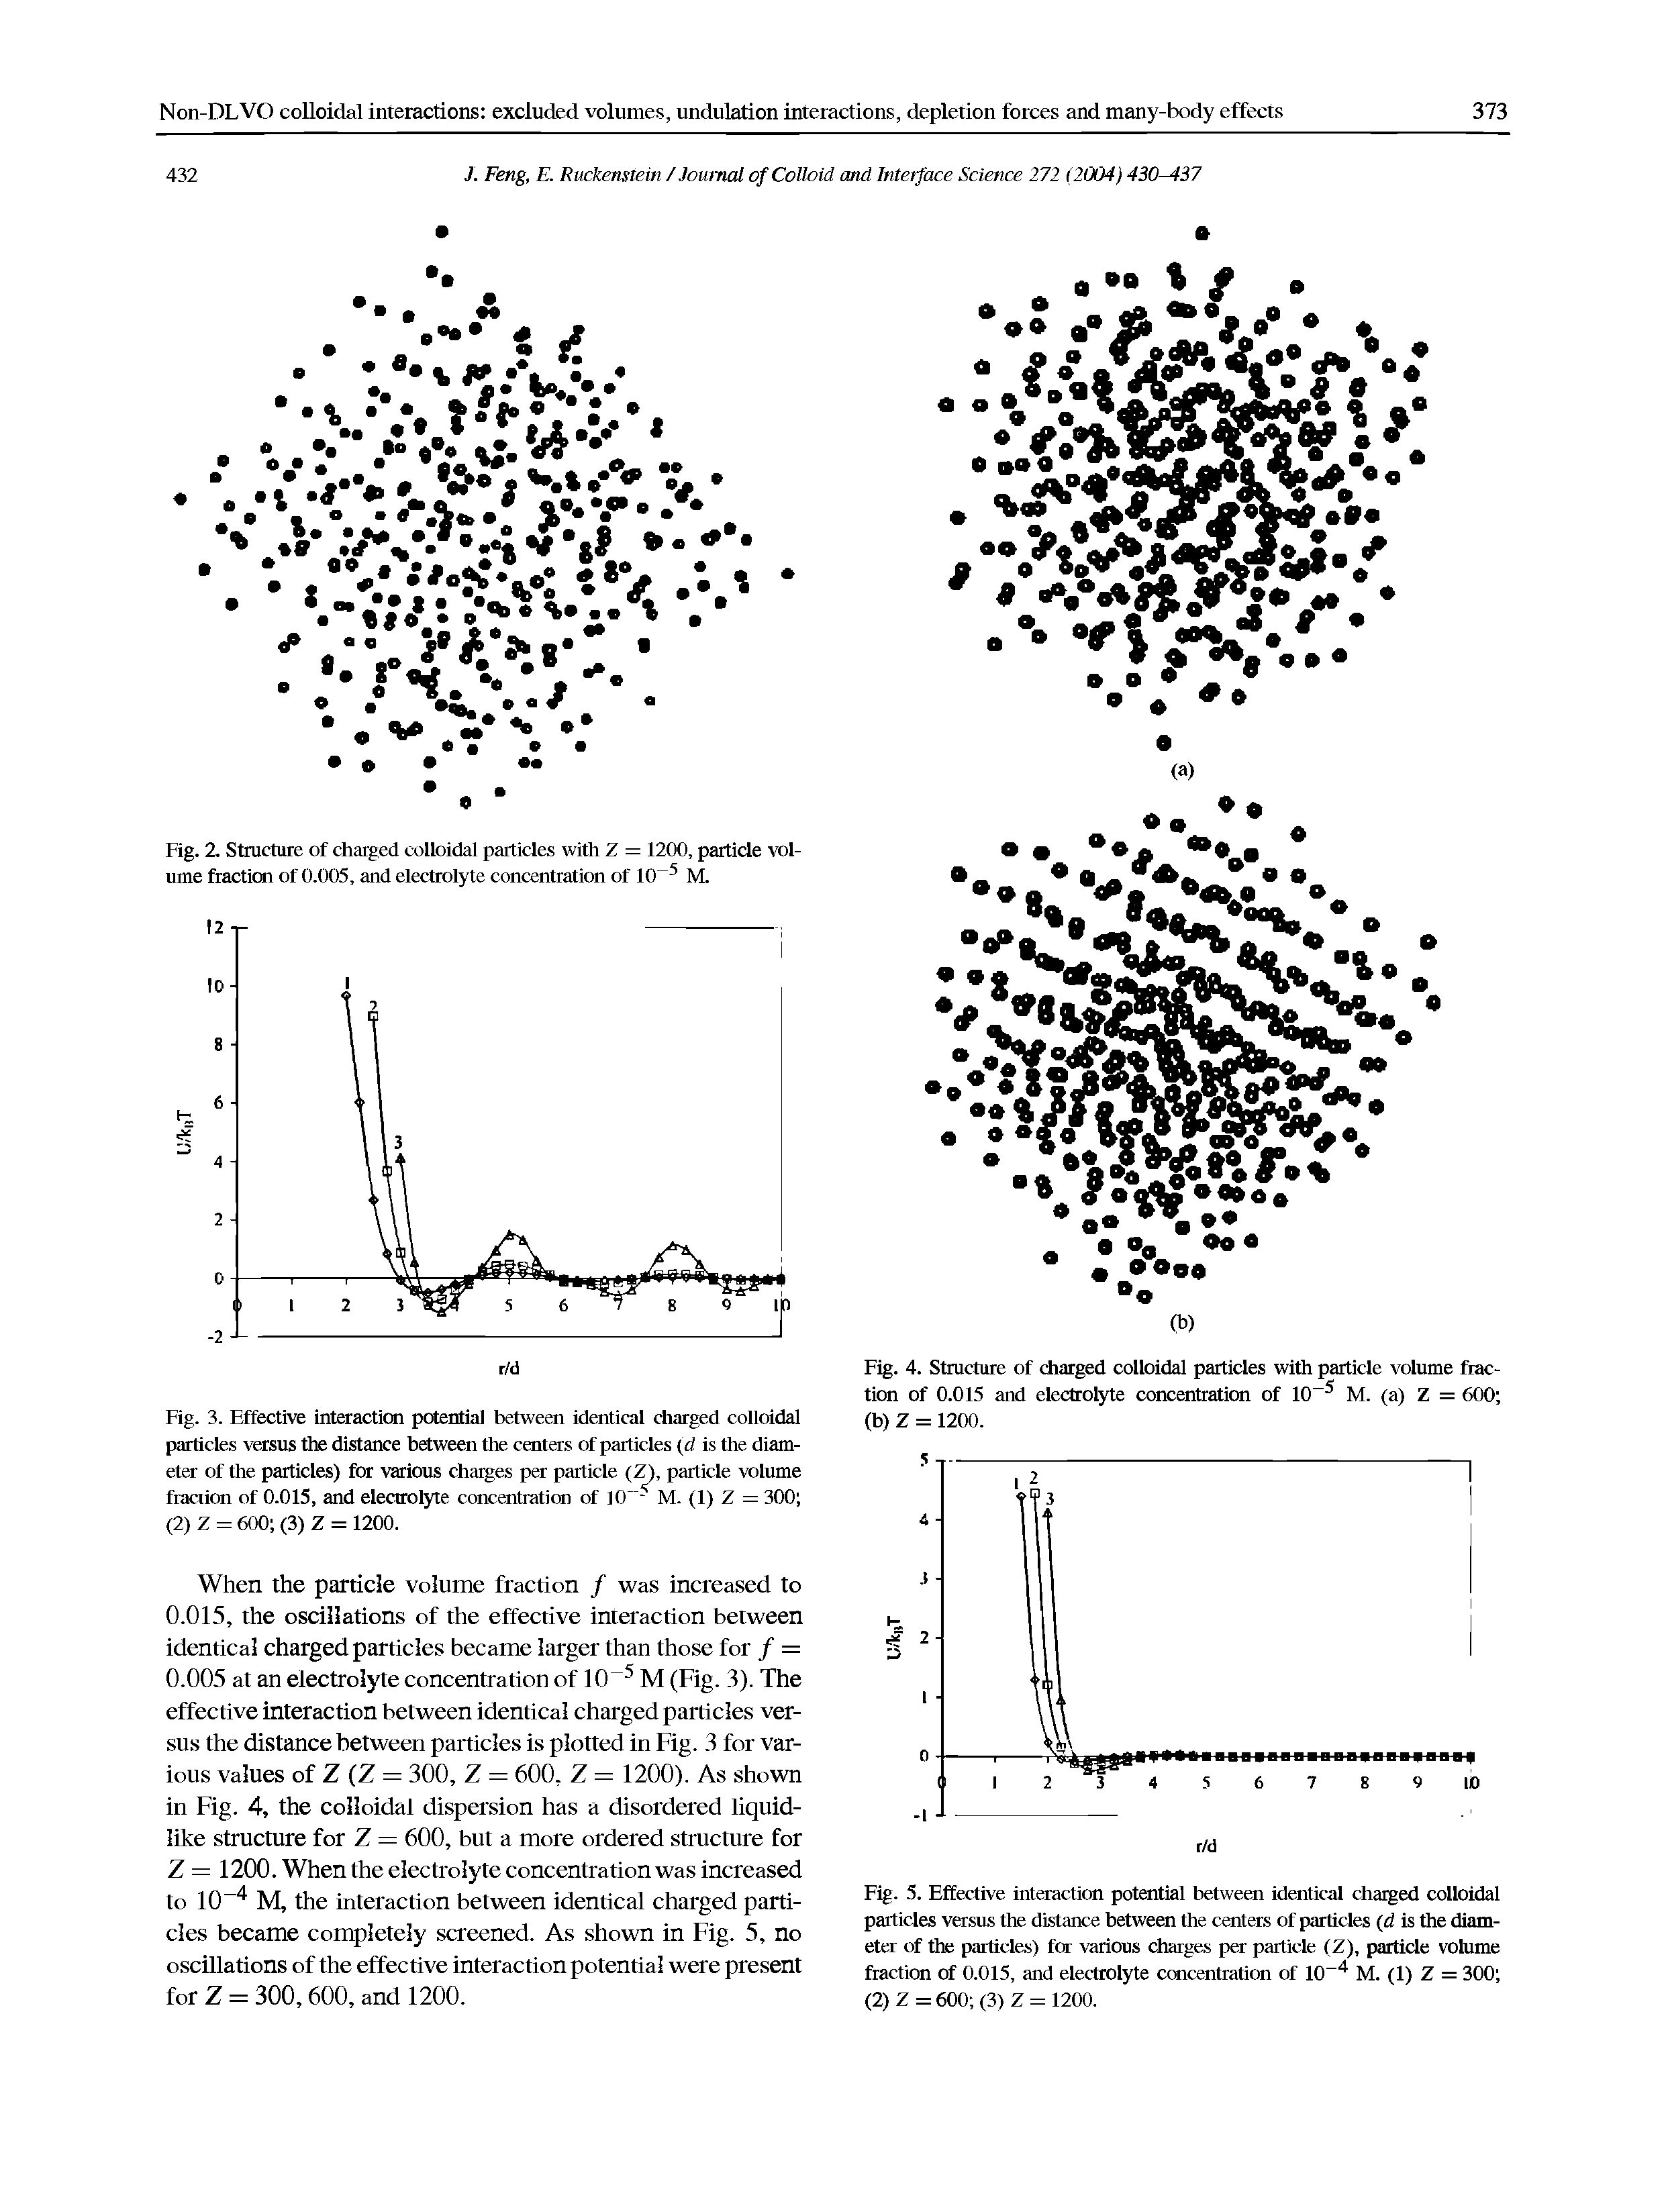 Fig. 3. Effective interaction potential between identical charged colloidal particles versus the distance between the centers of particles (d is the diameter of the particles) for various charges per particle (Z), particle volume fraction of 0.015, and electrolyte concentration of 10 5 M. (1) Z = 300 (2) Z = 600 (3) Z = 1200.